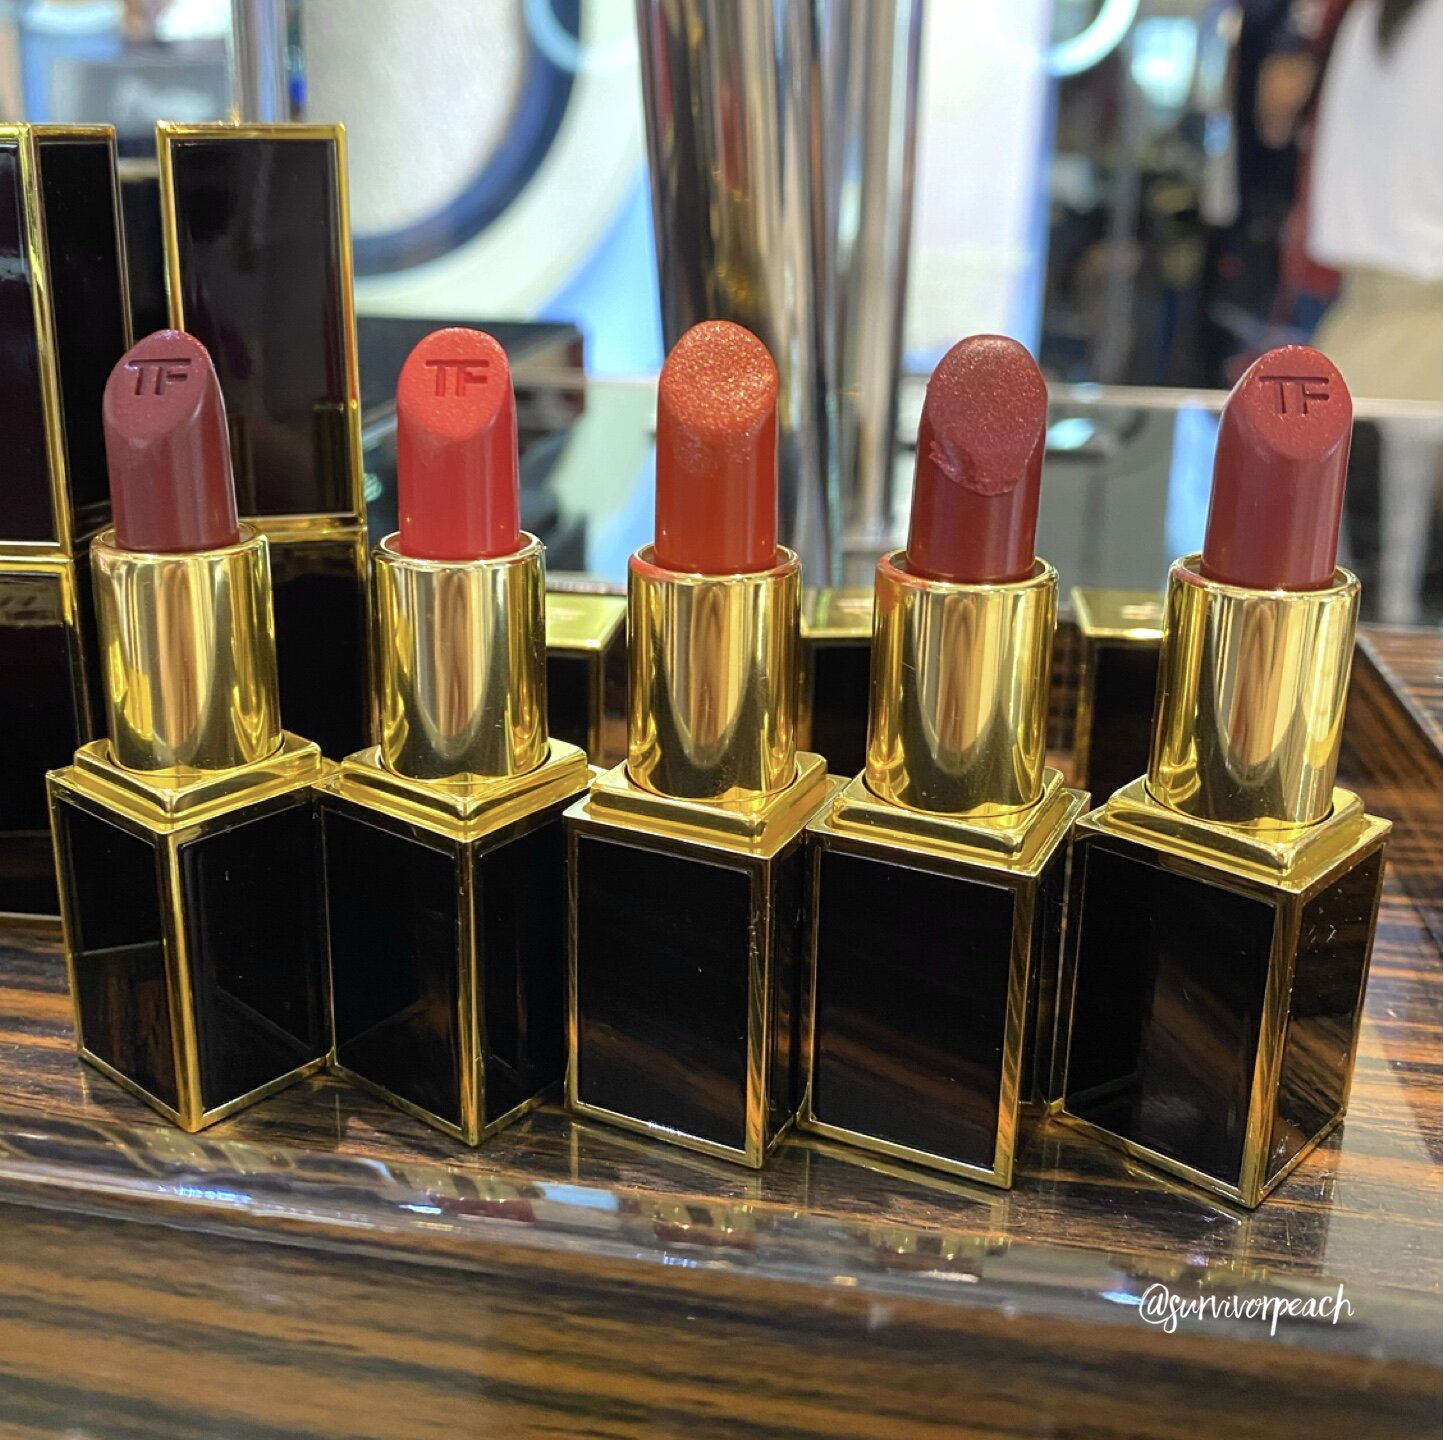 Incredible value on Tom Ford Lip Color Sheer 10 Carriacou 3G with